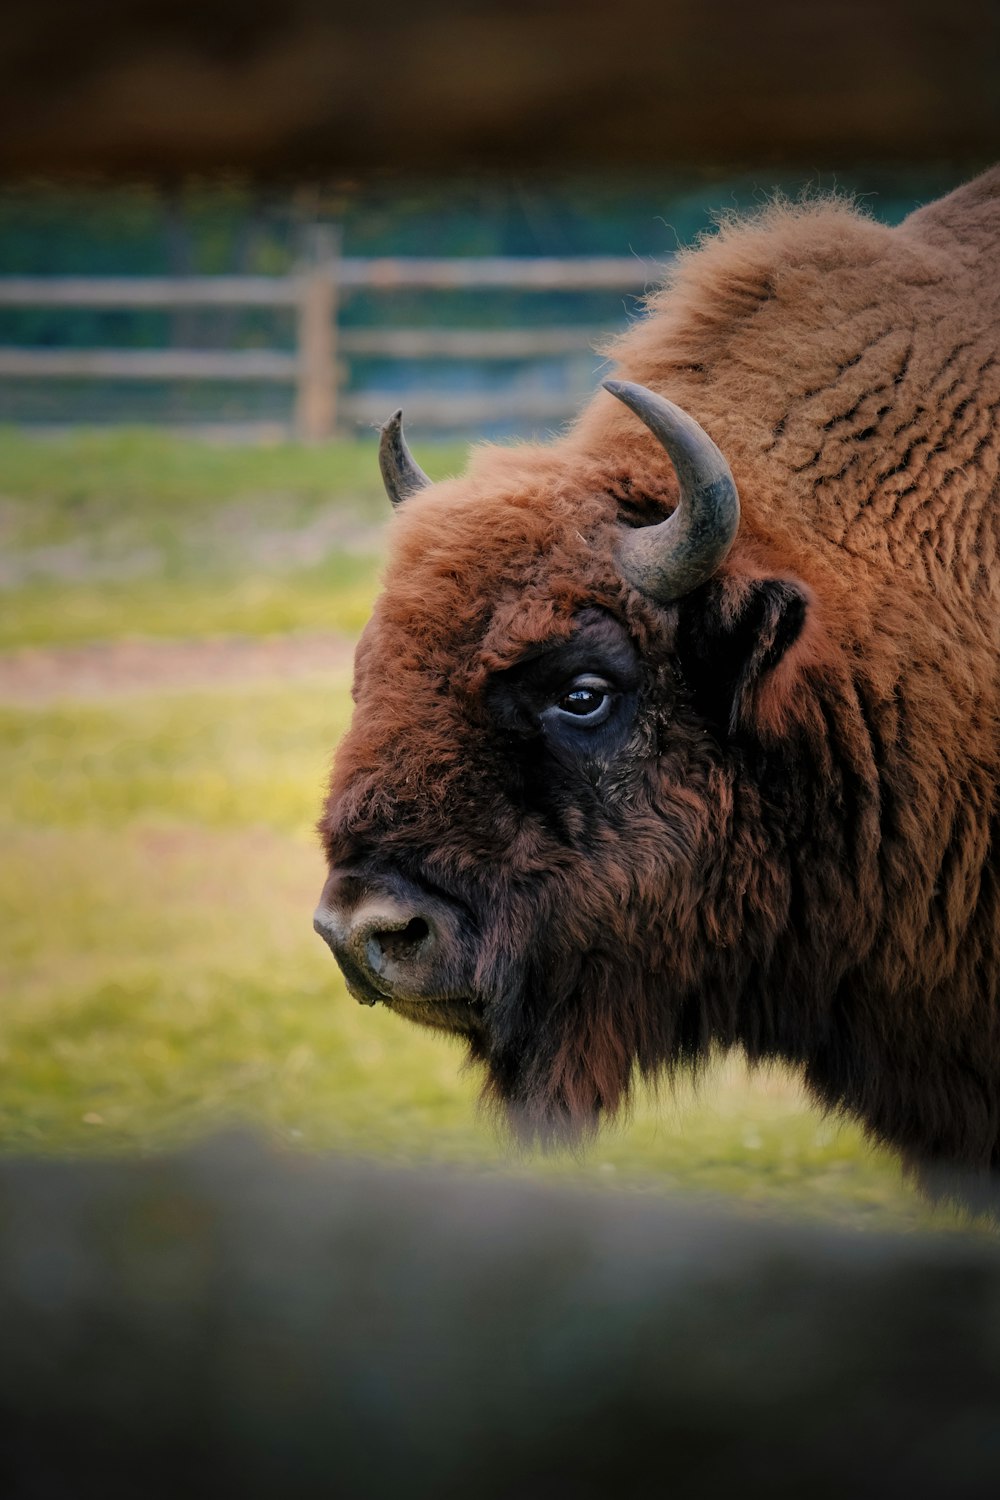 a bison with large horns standing in a field